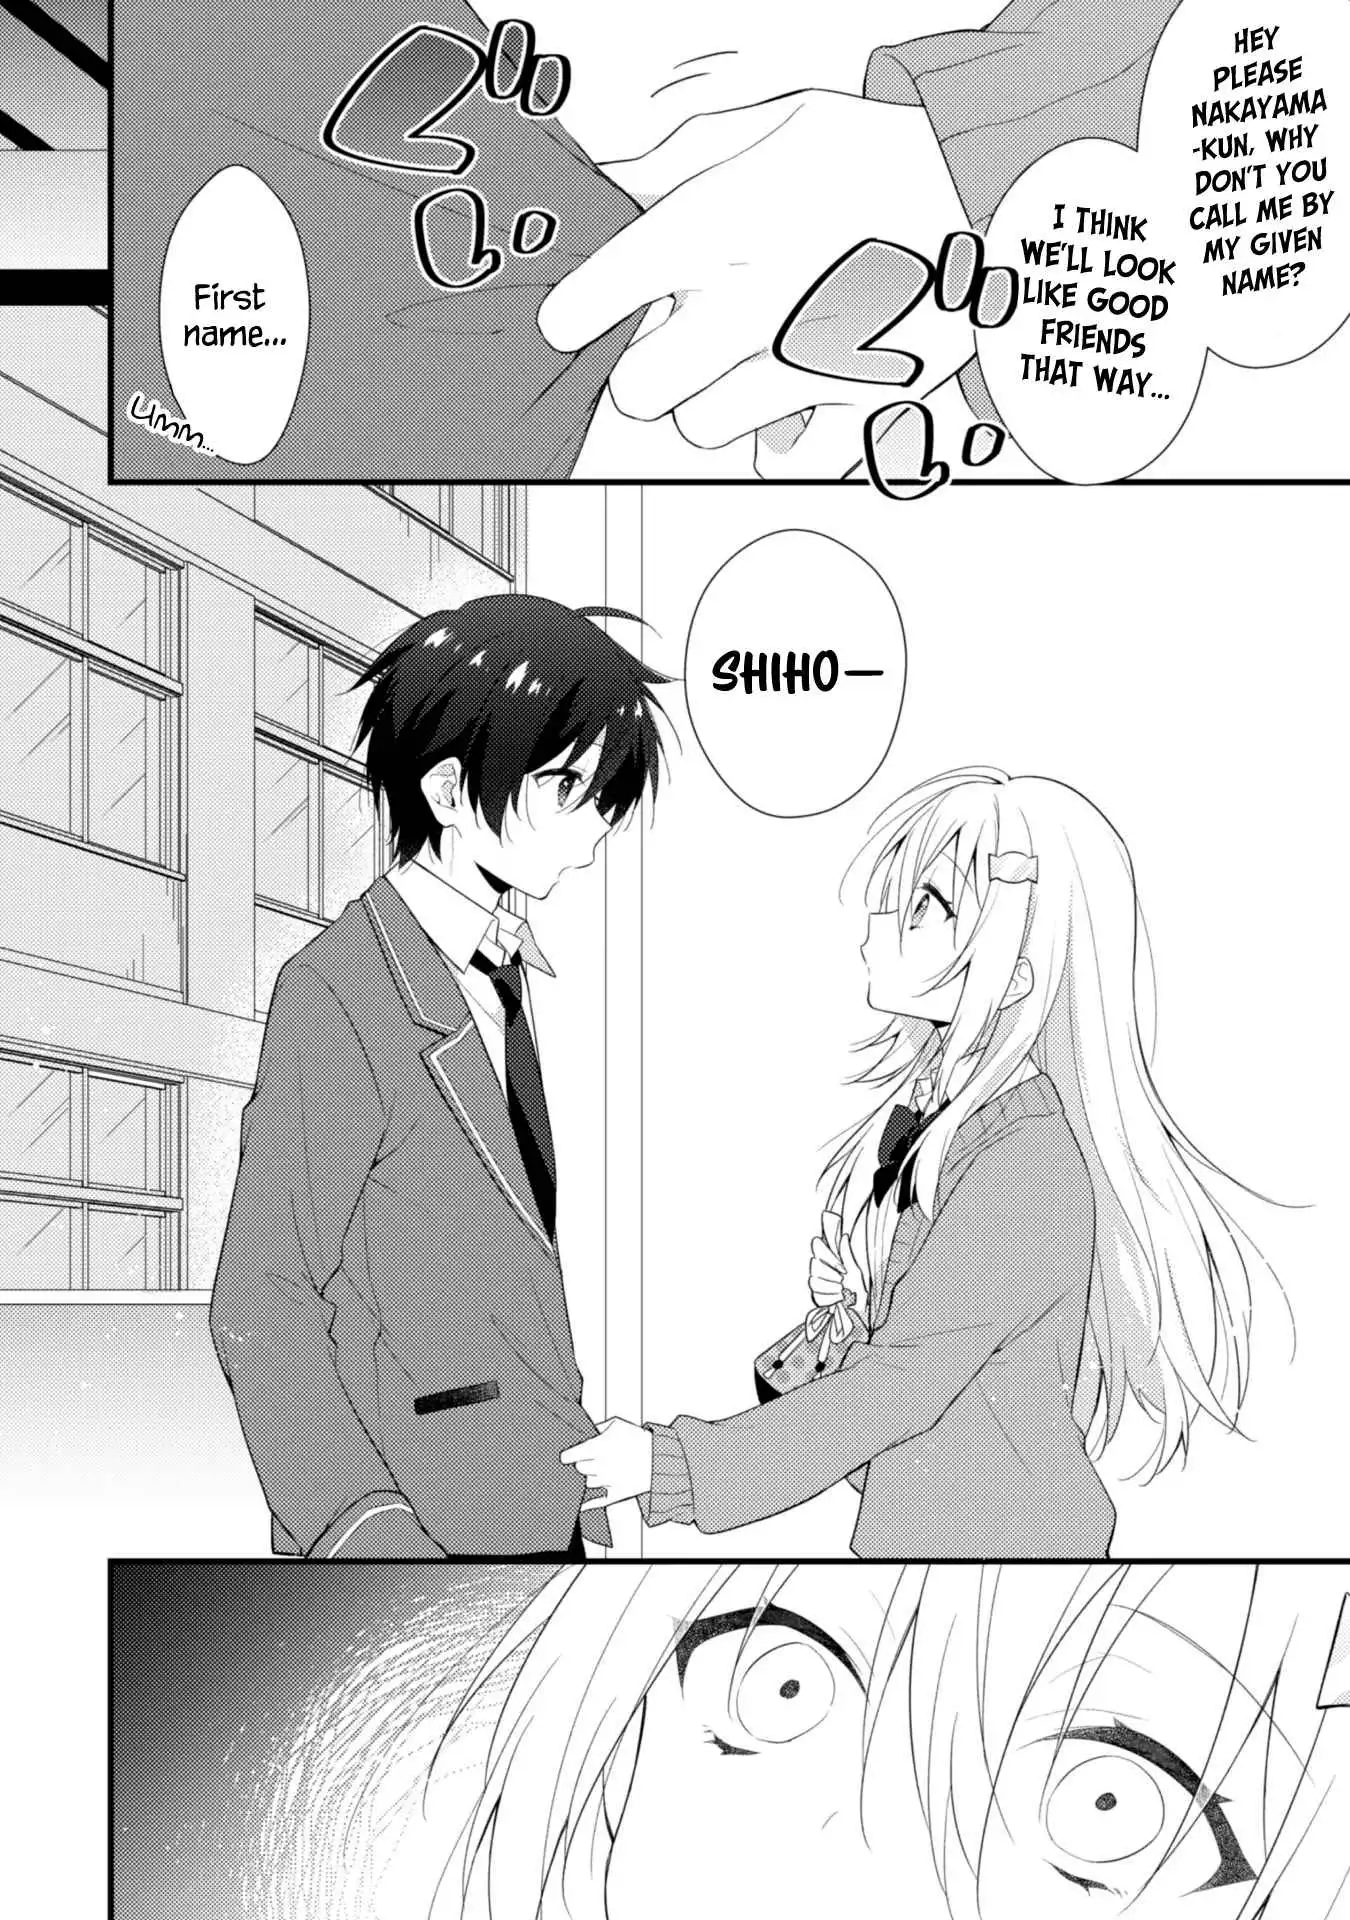 Shimotsuki-san Likes the Mob ~This Shy Girl is Only Sweet Towards Me~ Chapter 2.1